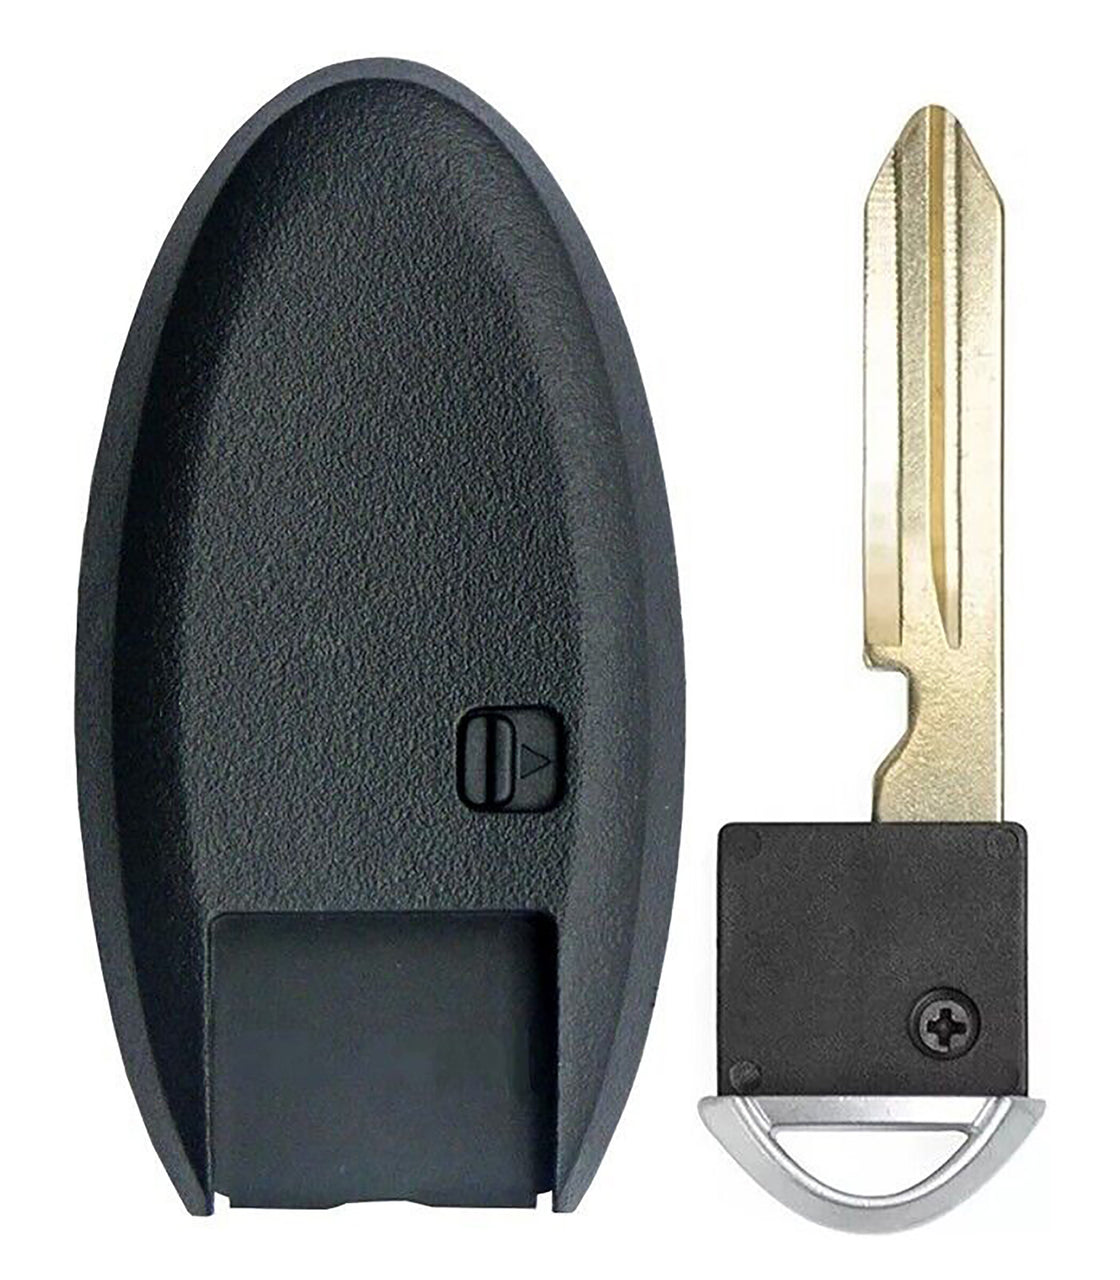 1x New Replacement Proximity Key Fob SHELL / CASE Compatible with & Fit For Nissan Infiniti - MPN CWTW-SHELL-04 (NO electronics or Chip inside)